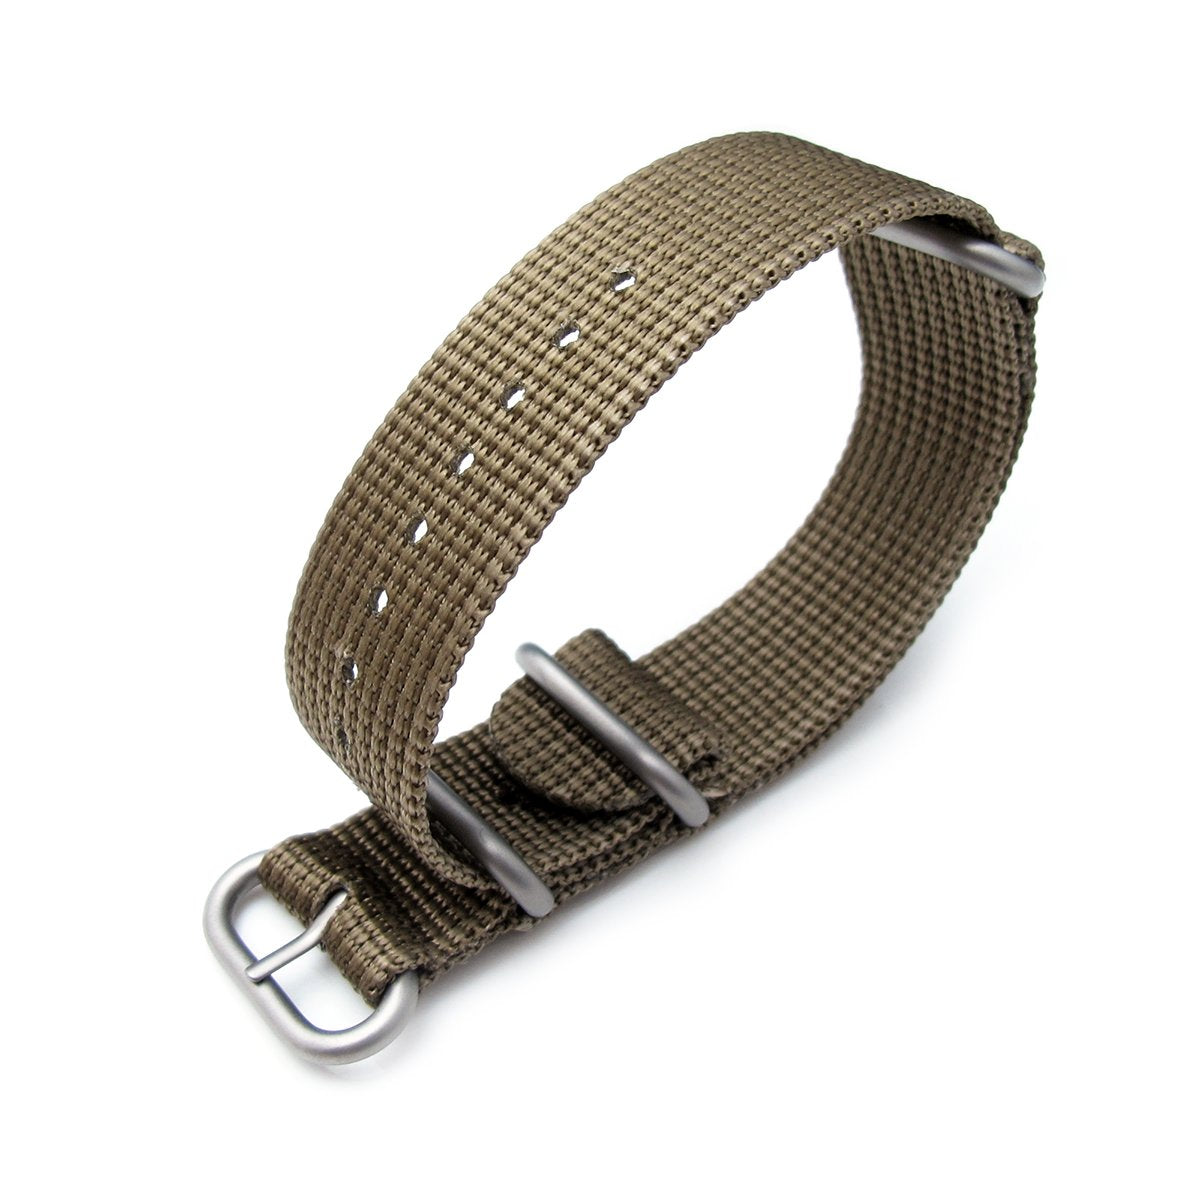 MiLTAT 20mm 22mm or 24mm 3 Rings Zulu military watch strap 3D woven nylon armband Khaki Brushed Hardware Strapcode Watch Bands